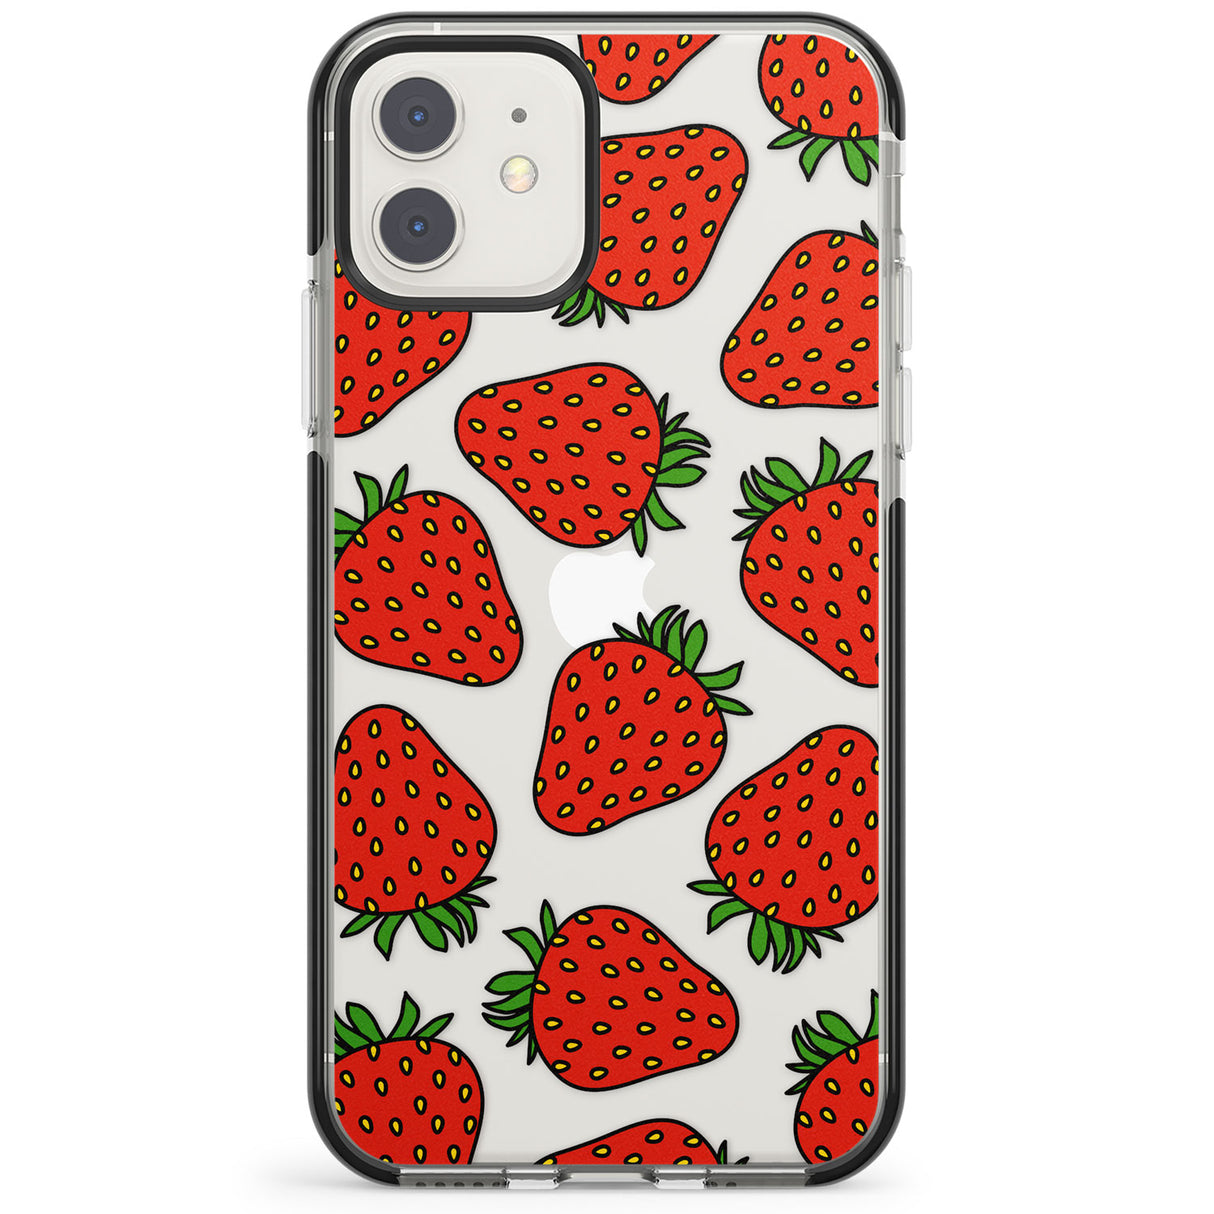 Strawberry Pattern Impact Phone Case for iPhone 11, iphone 12